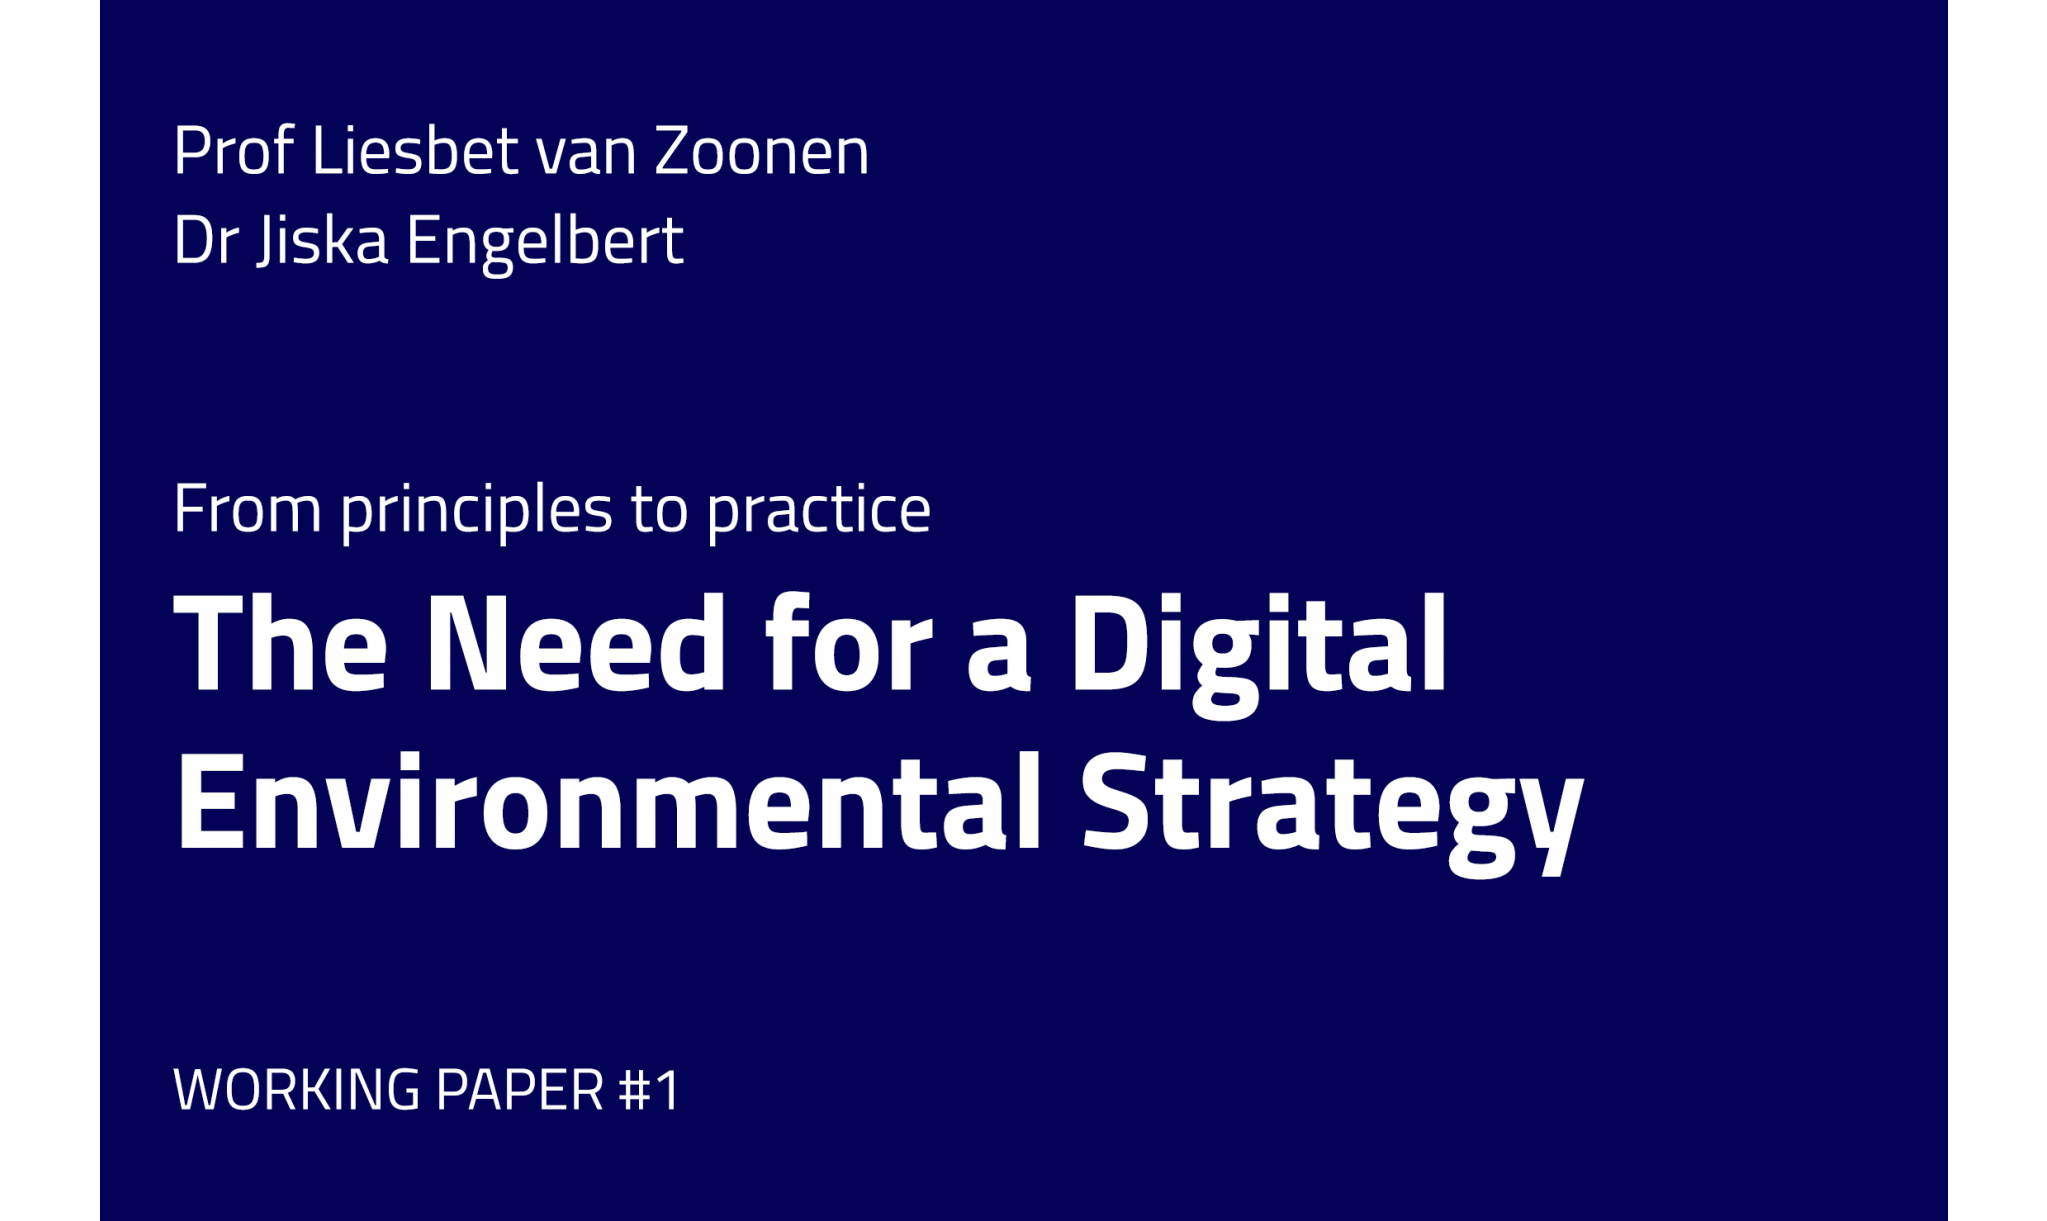 Working paper #1 - the need for a digital Environmental Strategy